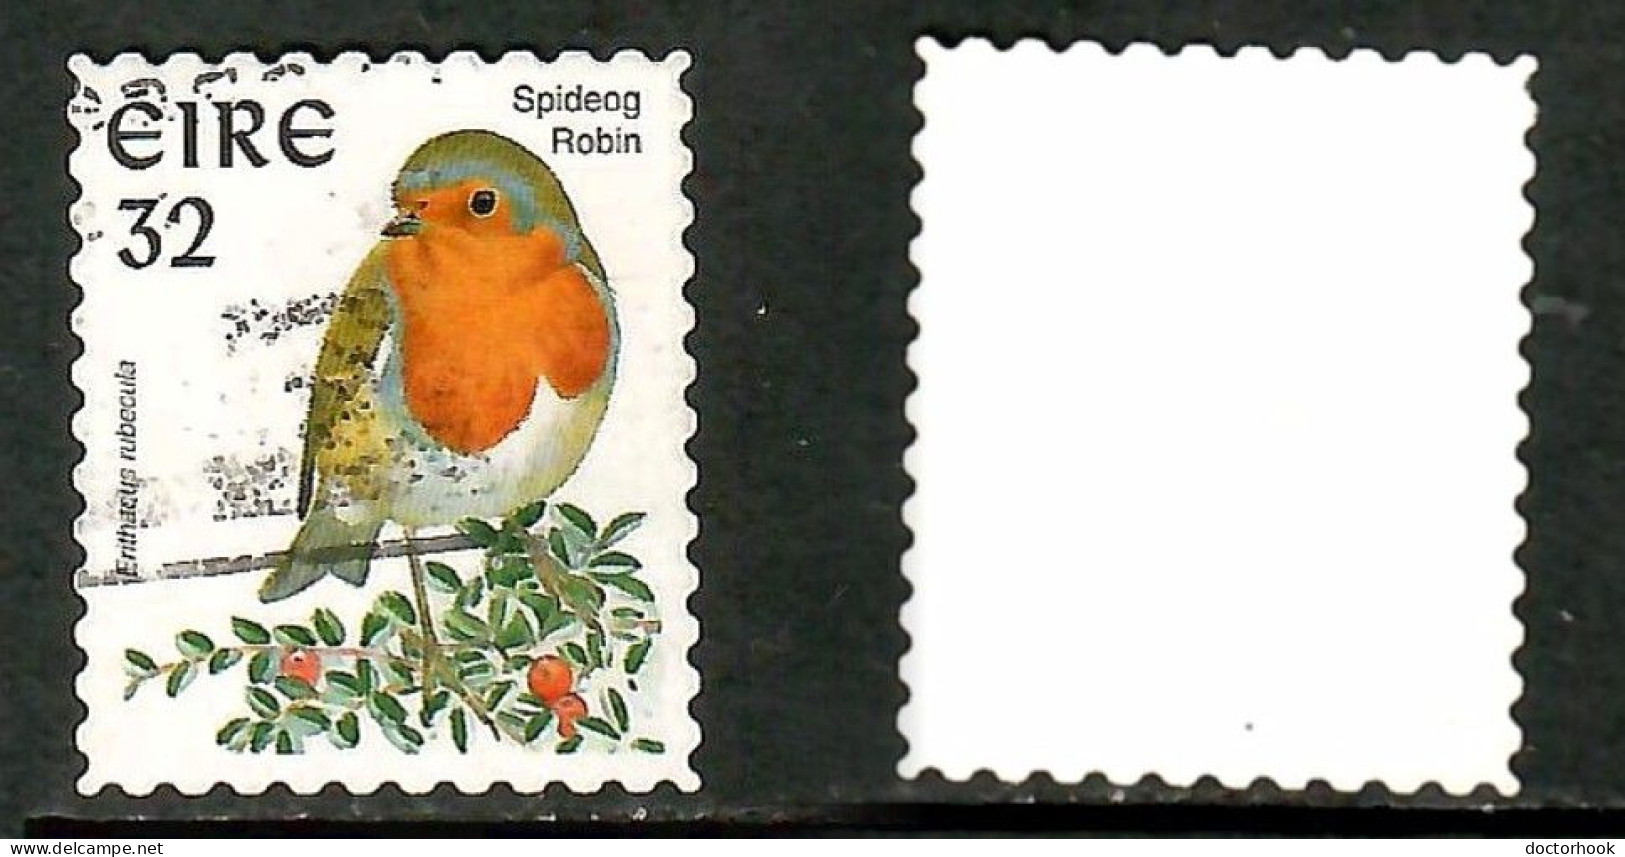 IRELAND   Scott # 1054 USED (CONDITION PER SCAN) (Stamp Scan # 1022-13) - Used Stamps